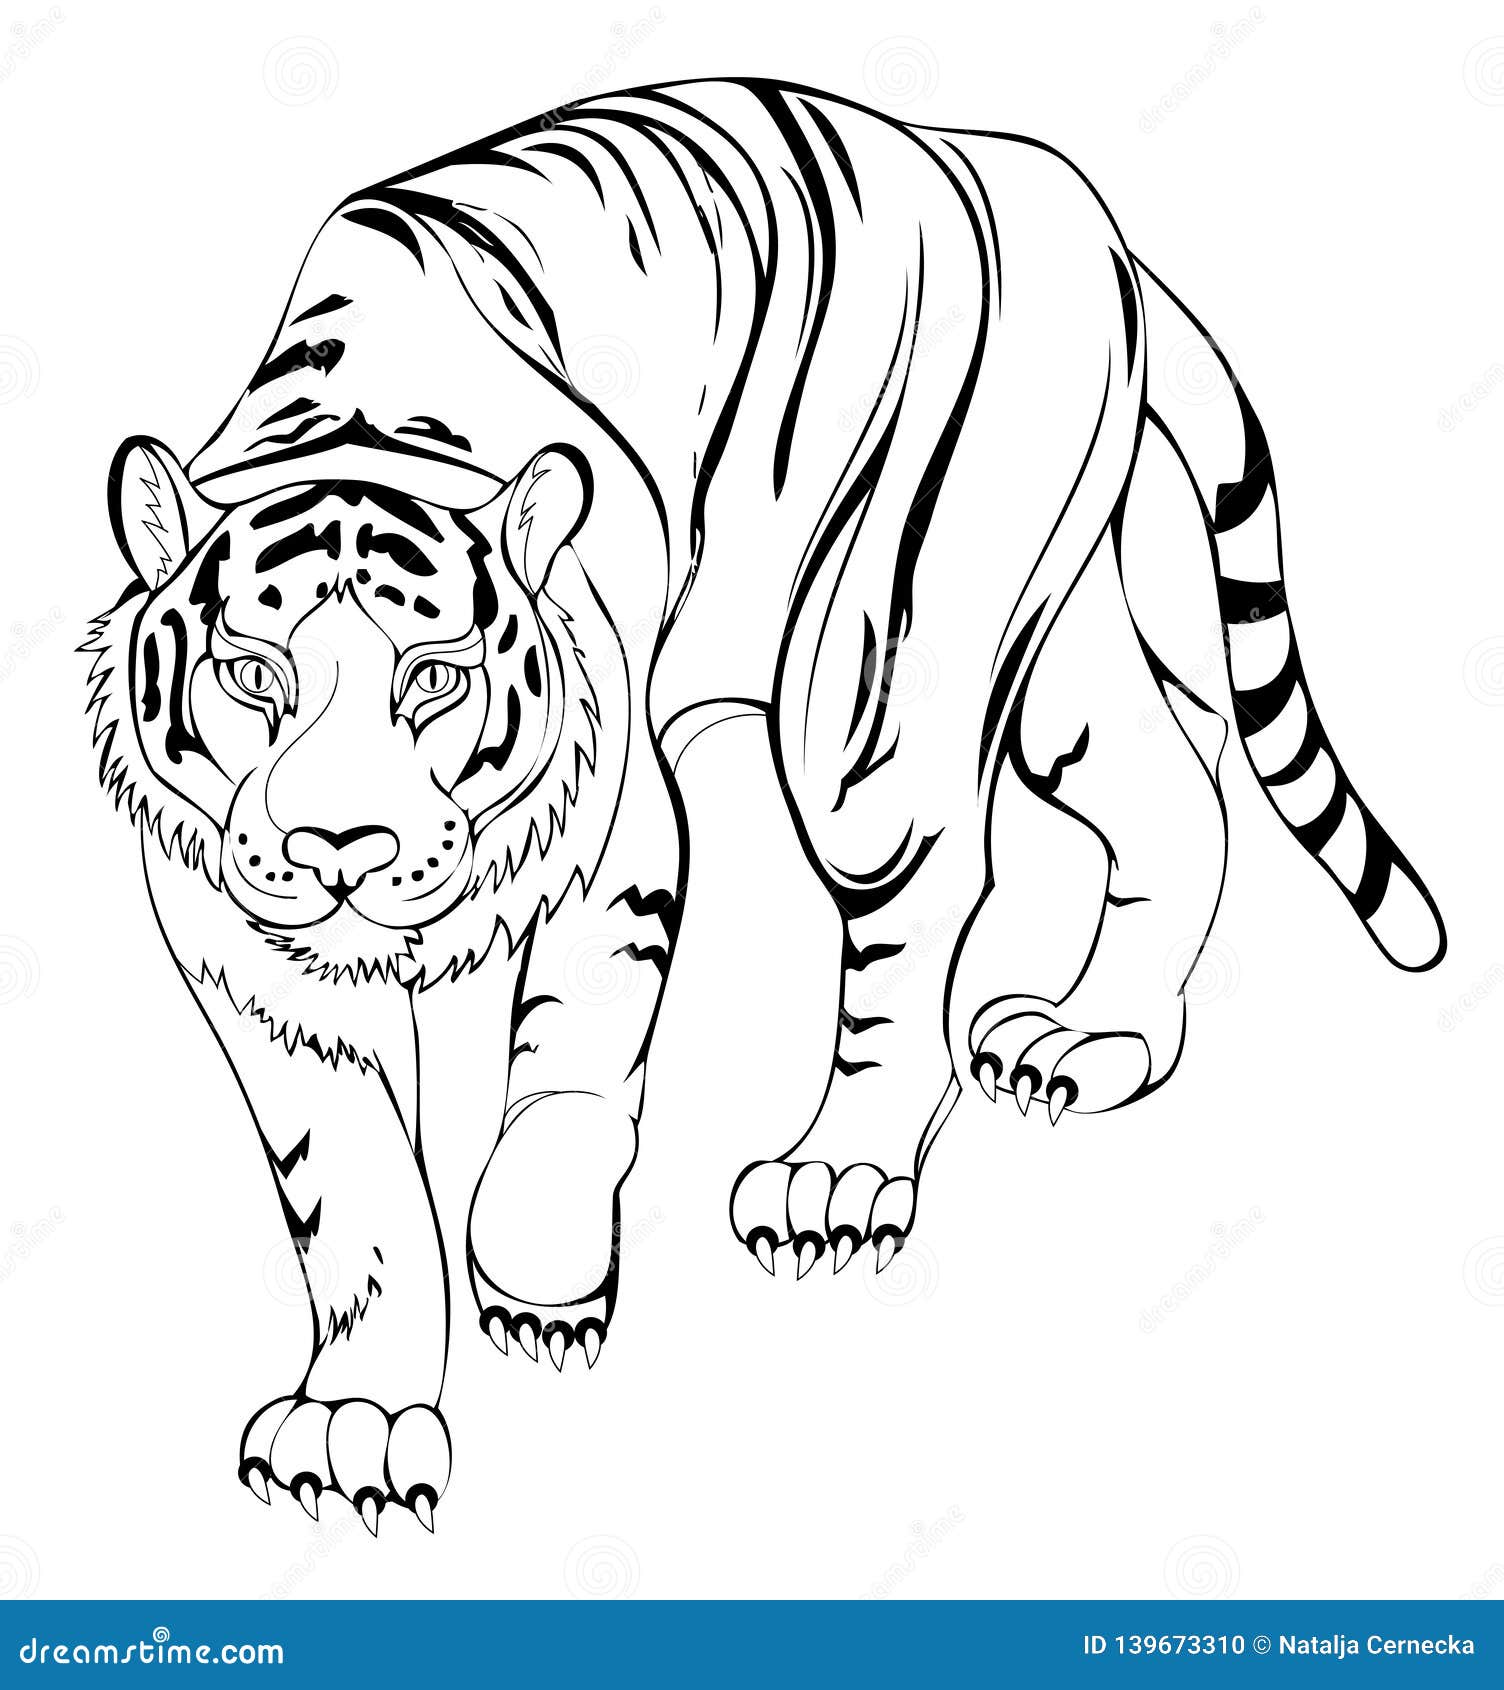 Tiger Coloring Pages - Growing Play